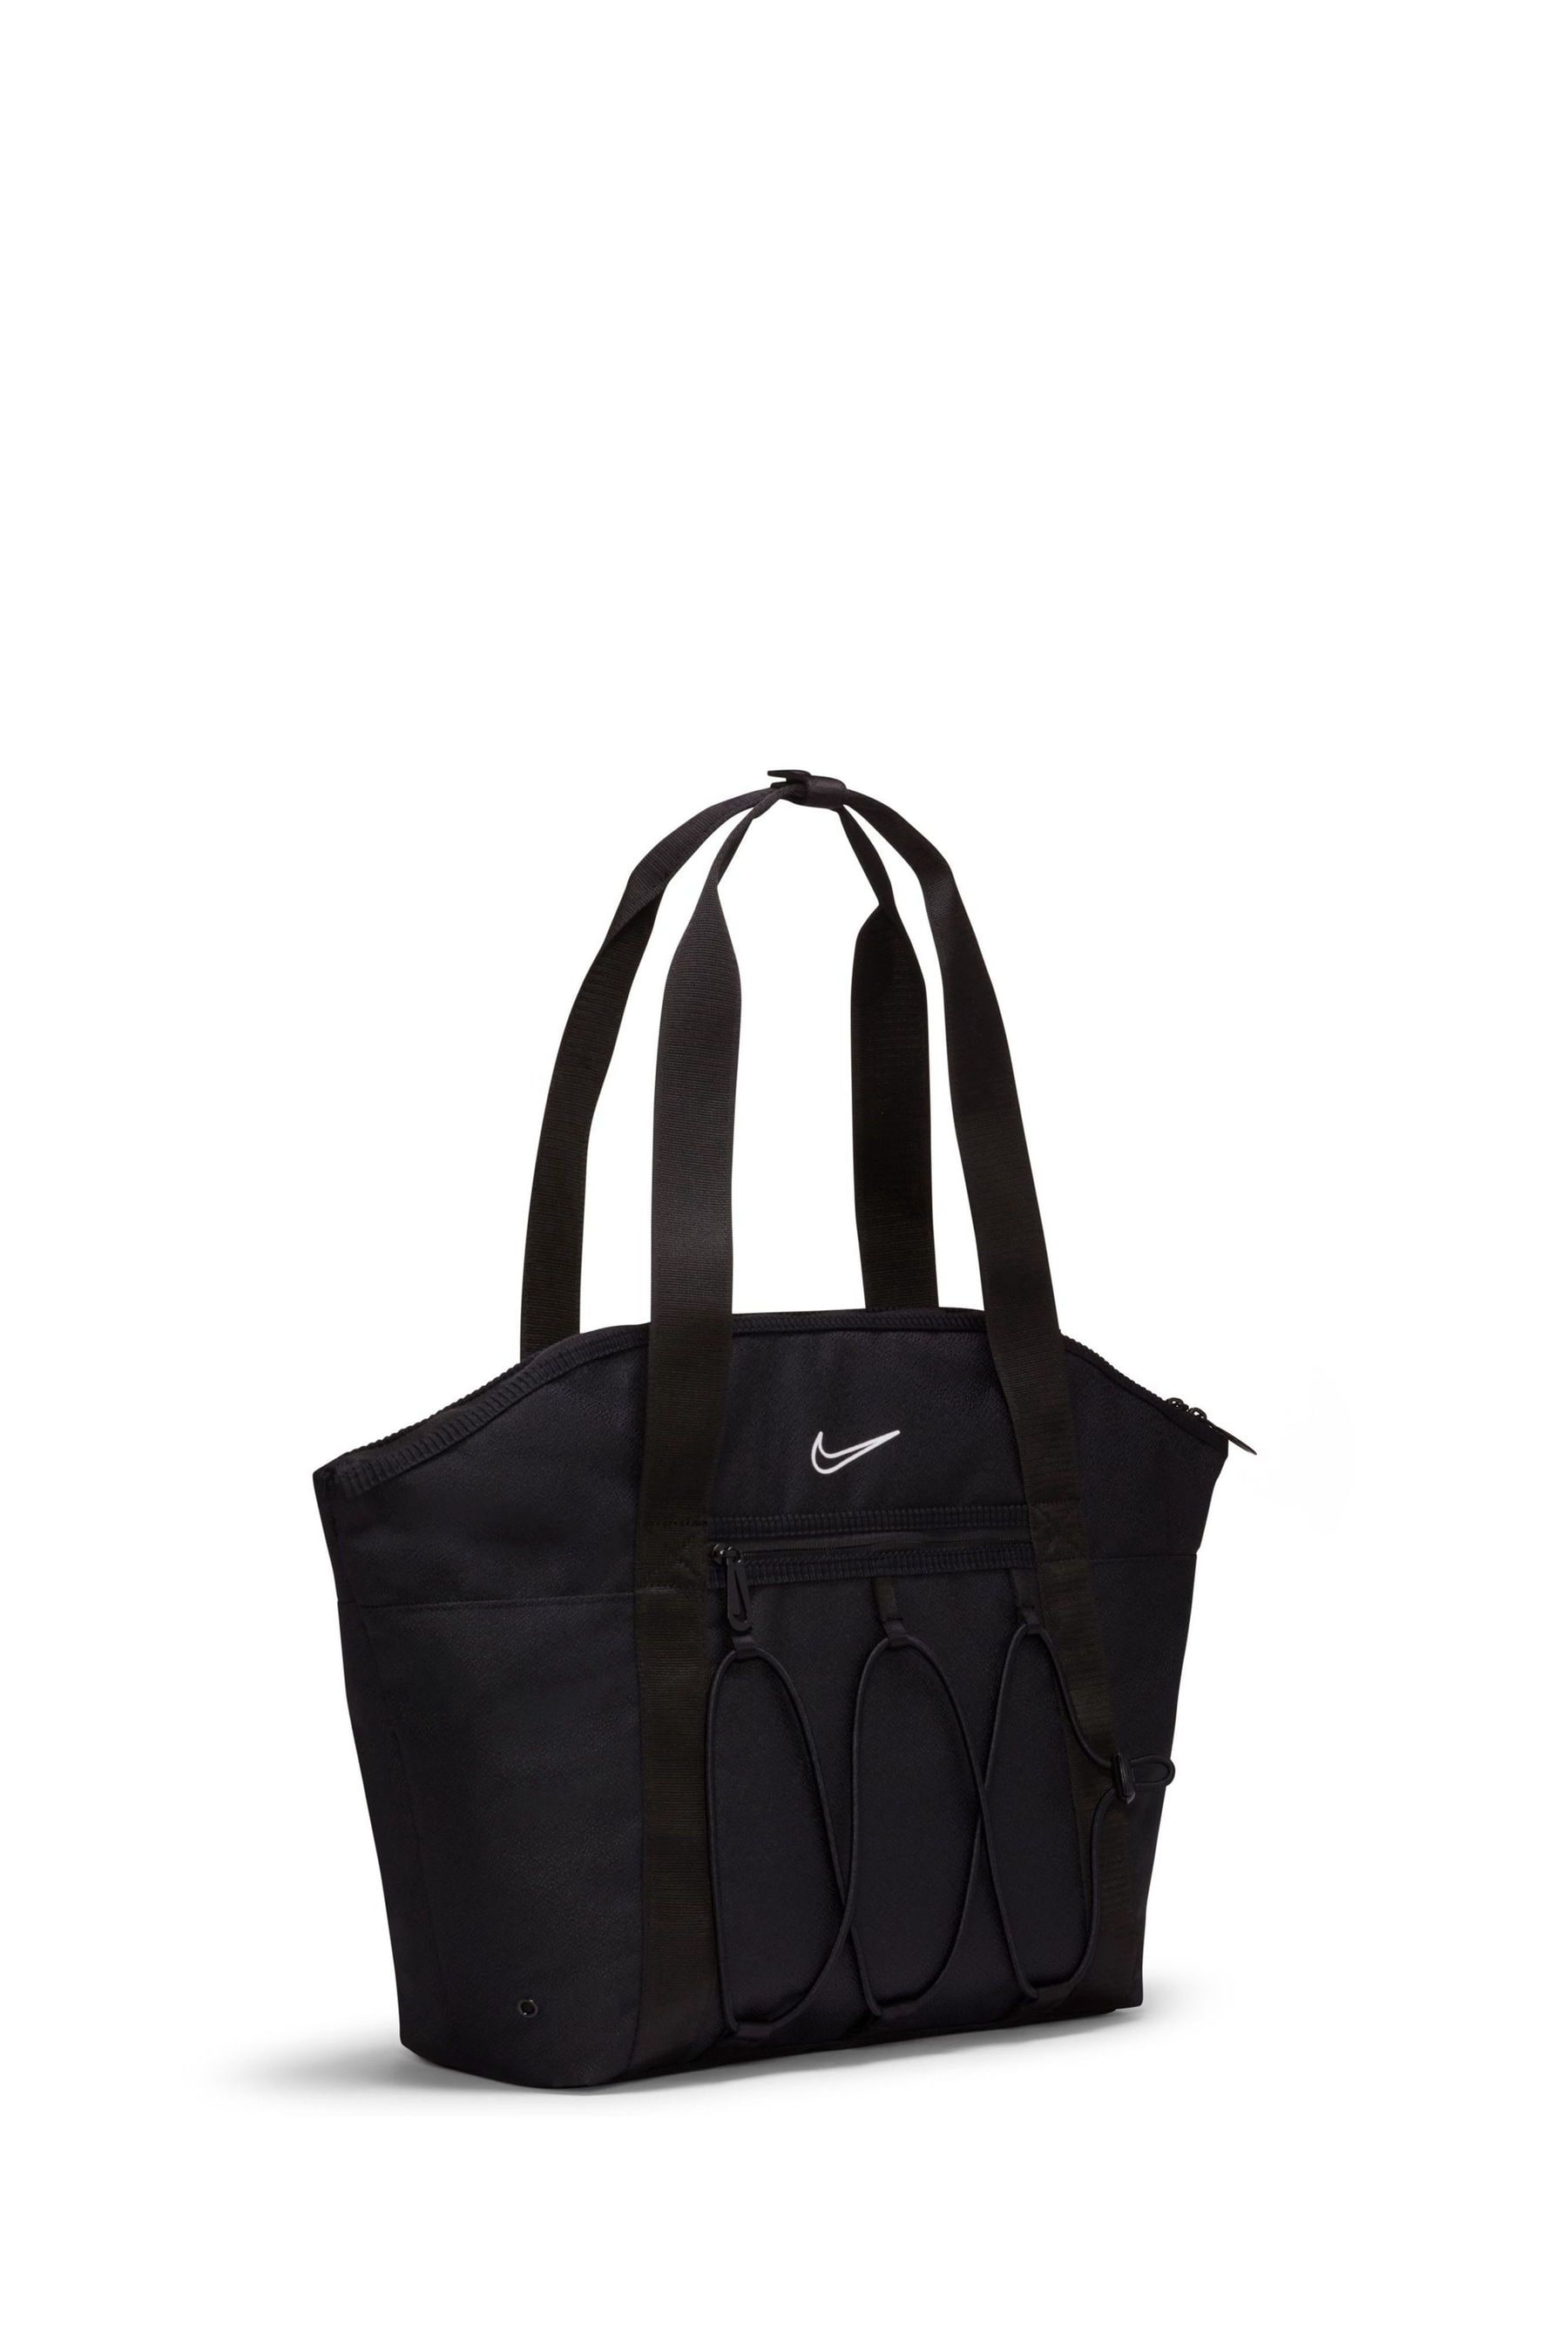 Buy Nike Black One Tote Bag from the Next UK online shop